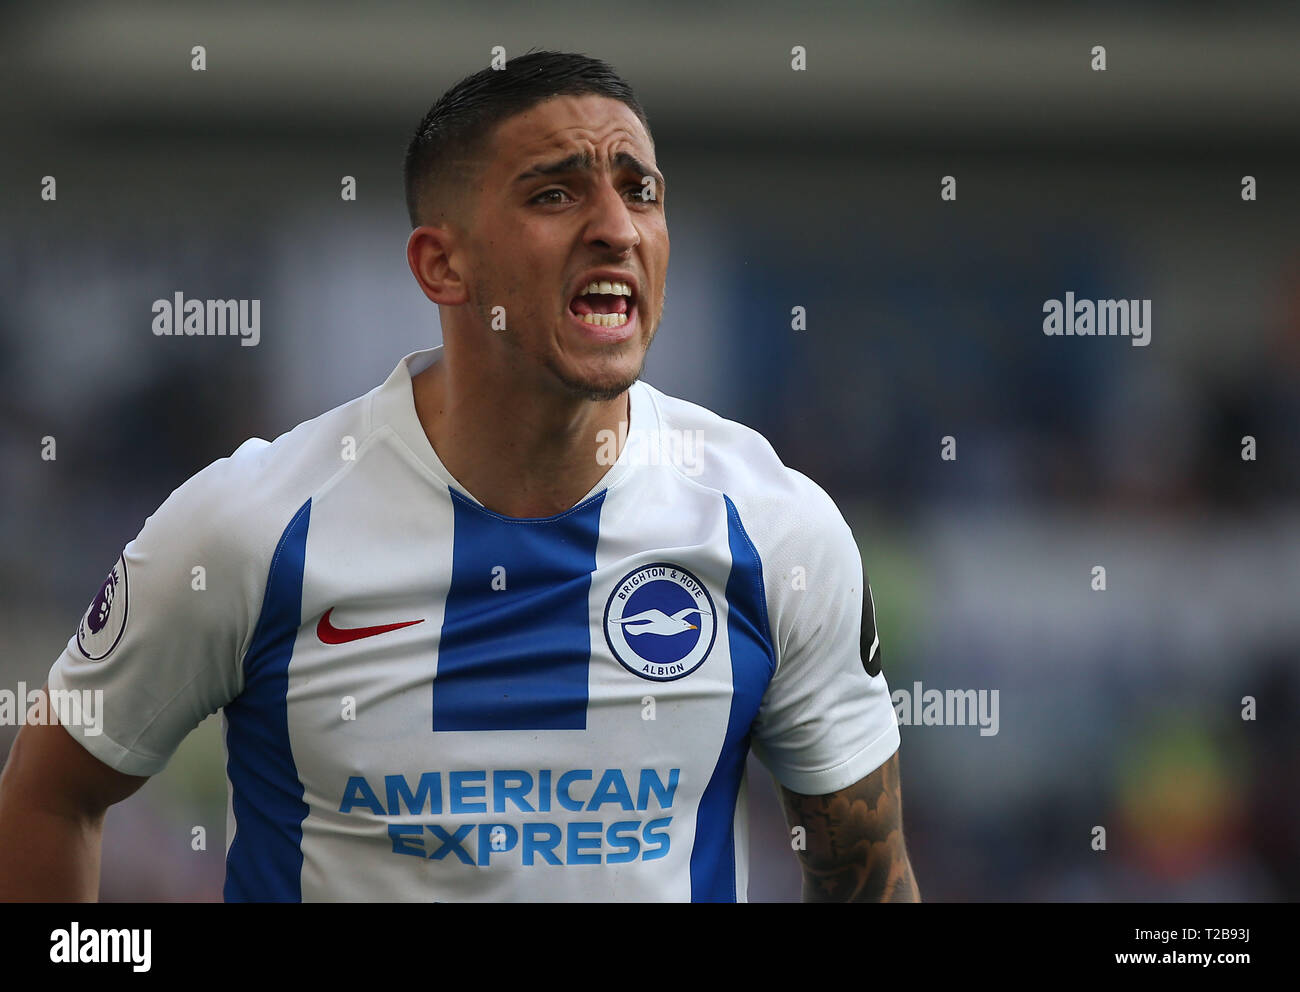 Brighton's Lewis Dunk gestures during the English Premier League match between Brighton Hove Albion and Southampton at the Amex Stadium in Brighton. 30 March  2019 Photo James Boardman / Telephoto Images EDITORIAL USE ONLY. No use with unauthorized audio, video, data, fixture lists, club/league logos or 'live' services. Online in-match use limited to 120 images, no video emulation. No use in betting, games or single club/league/player publications. Stock Photo